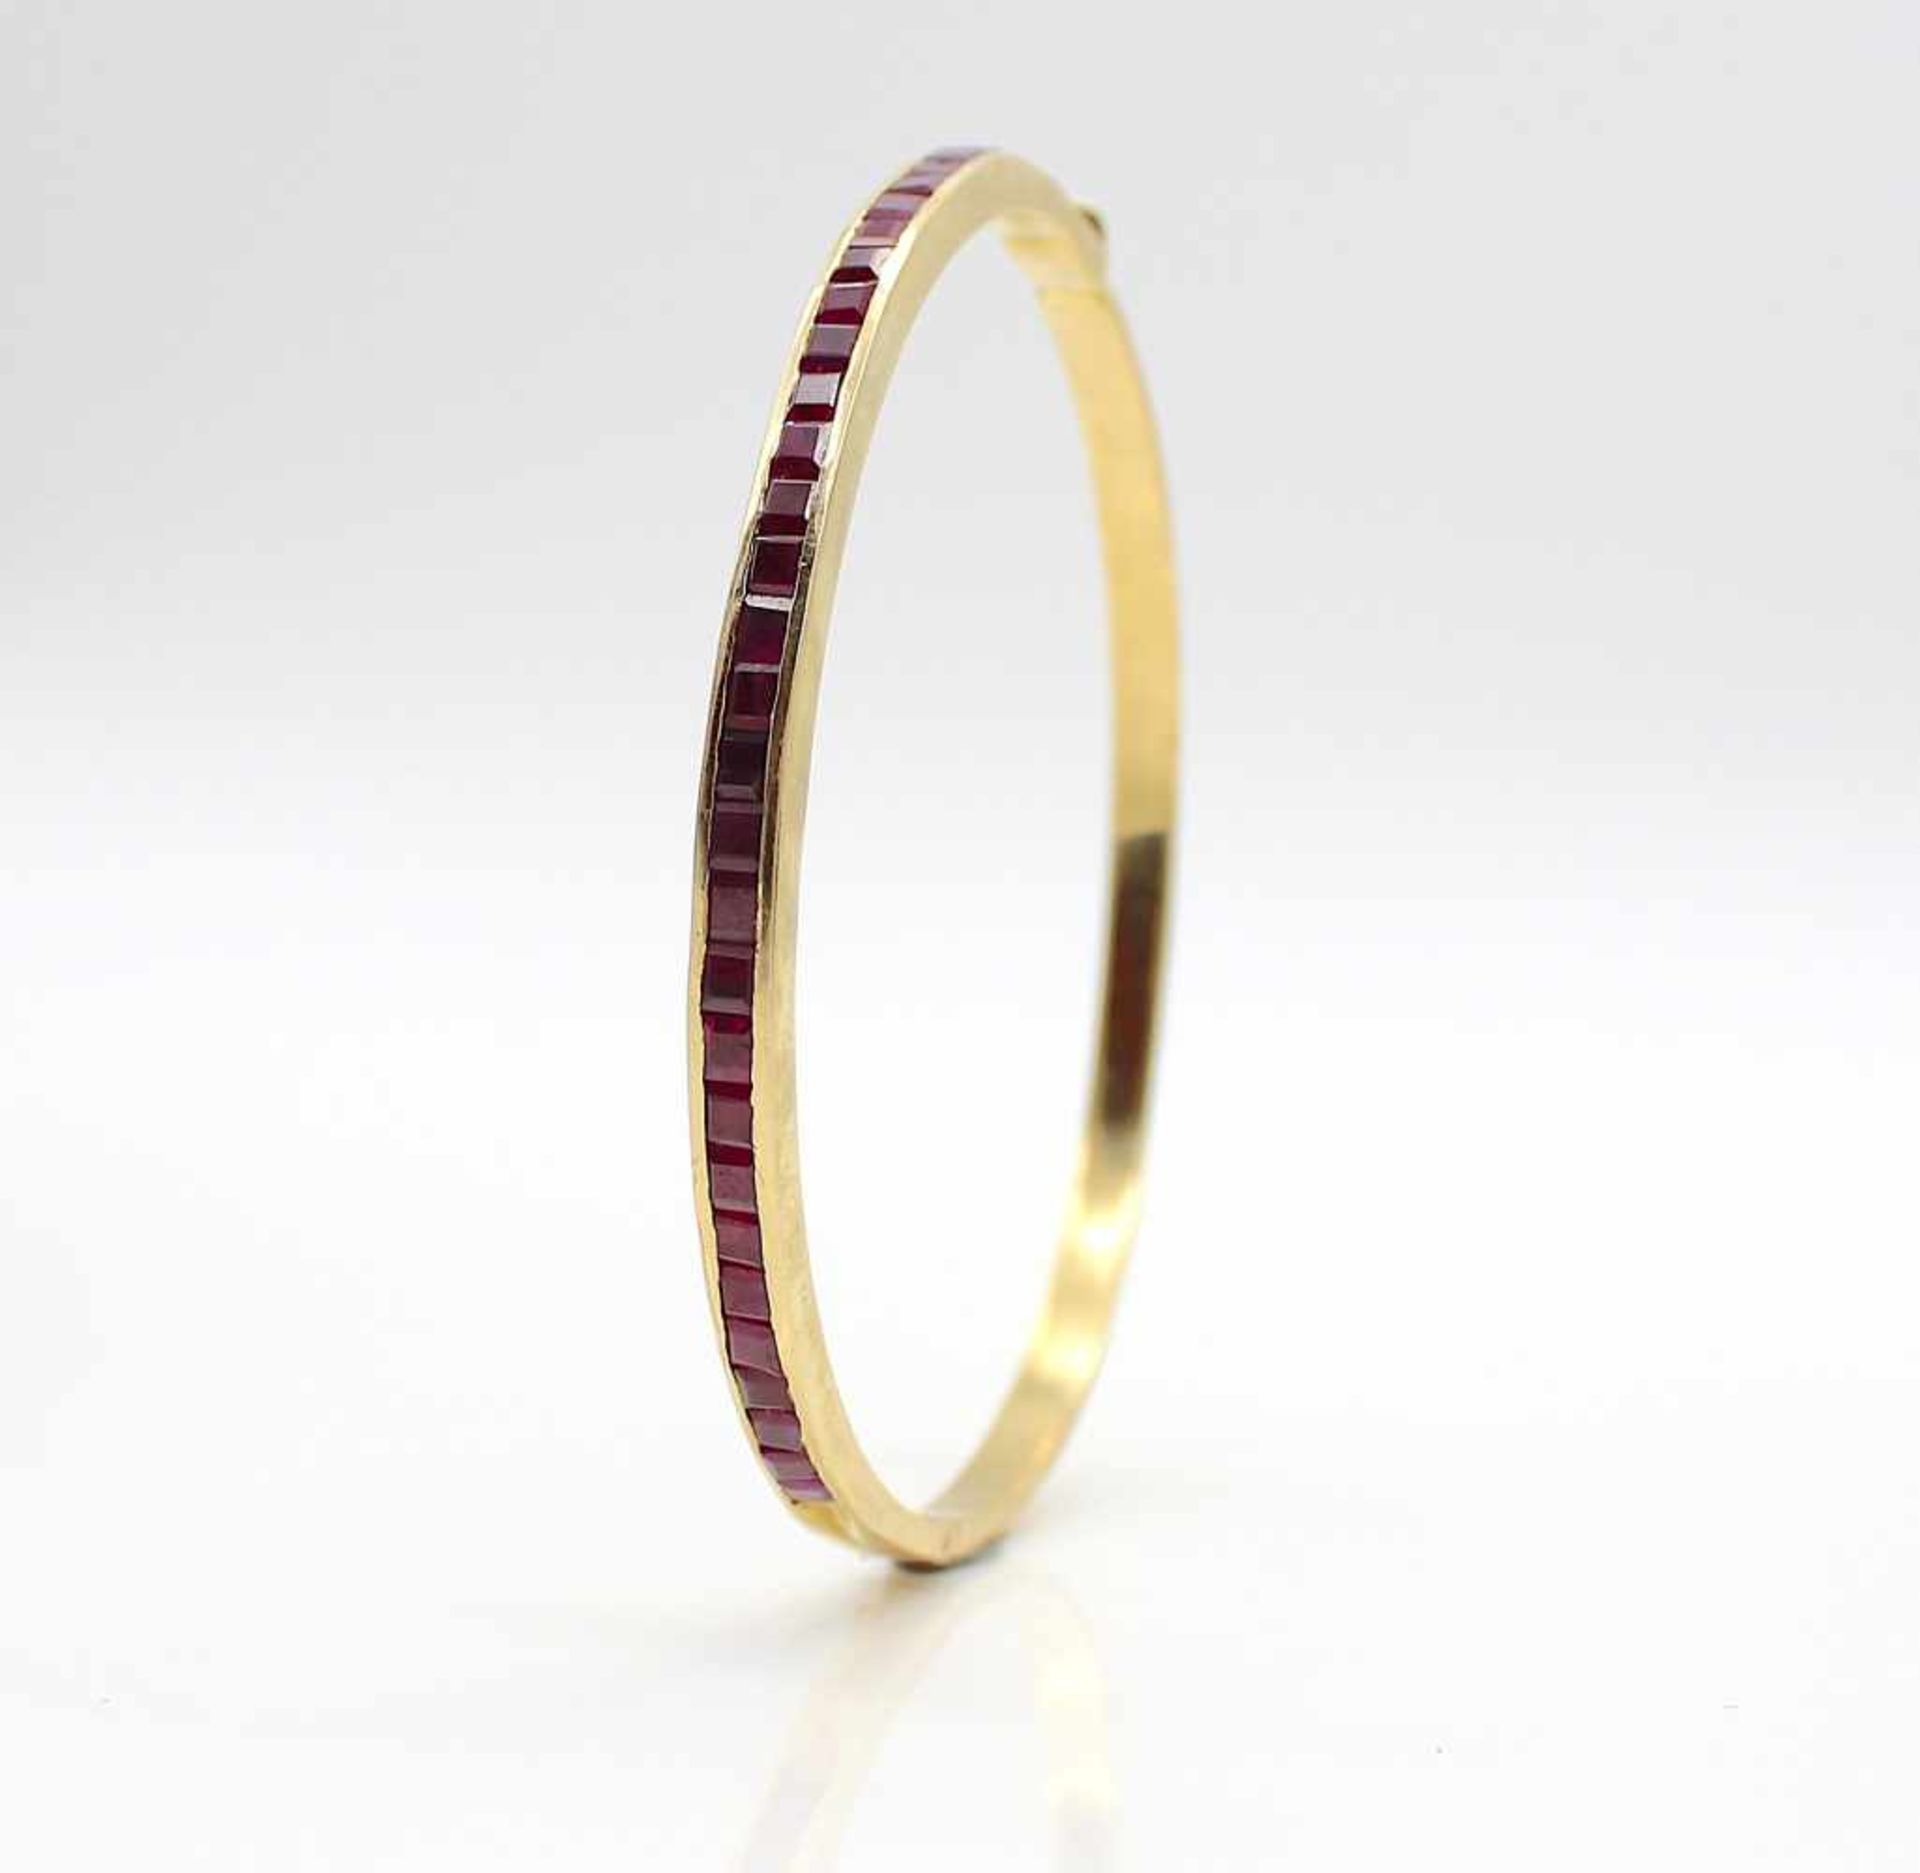 Bangle tested for 21,6 ct gold with 31 rubies, total ca. 4,6 ct. The bracelet would have to be re- - Bild 3 aus 3